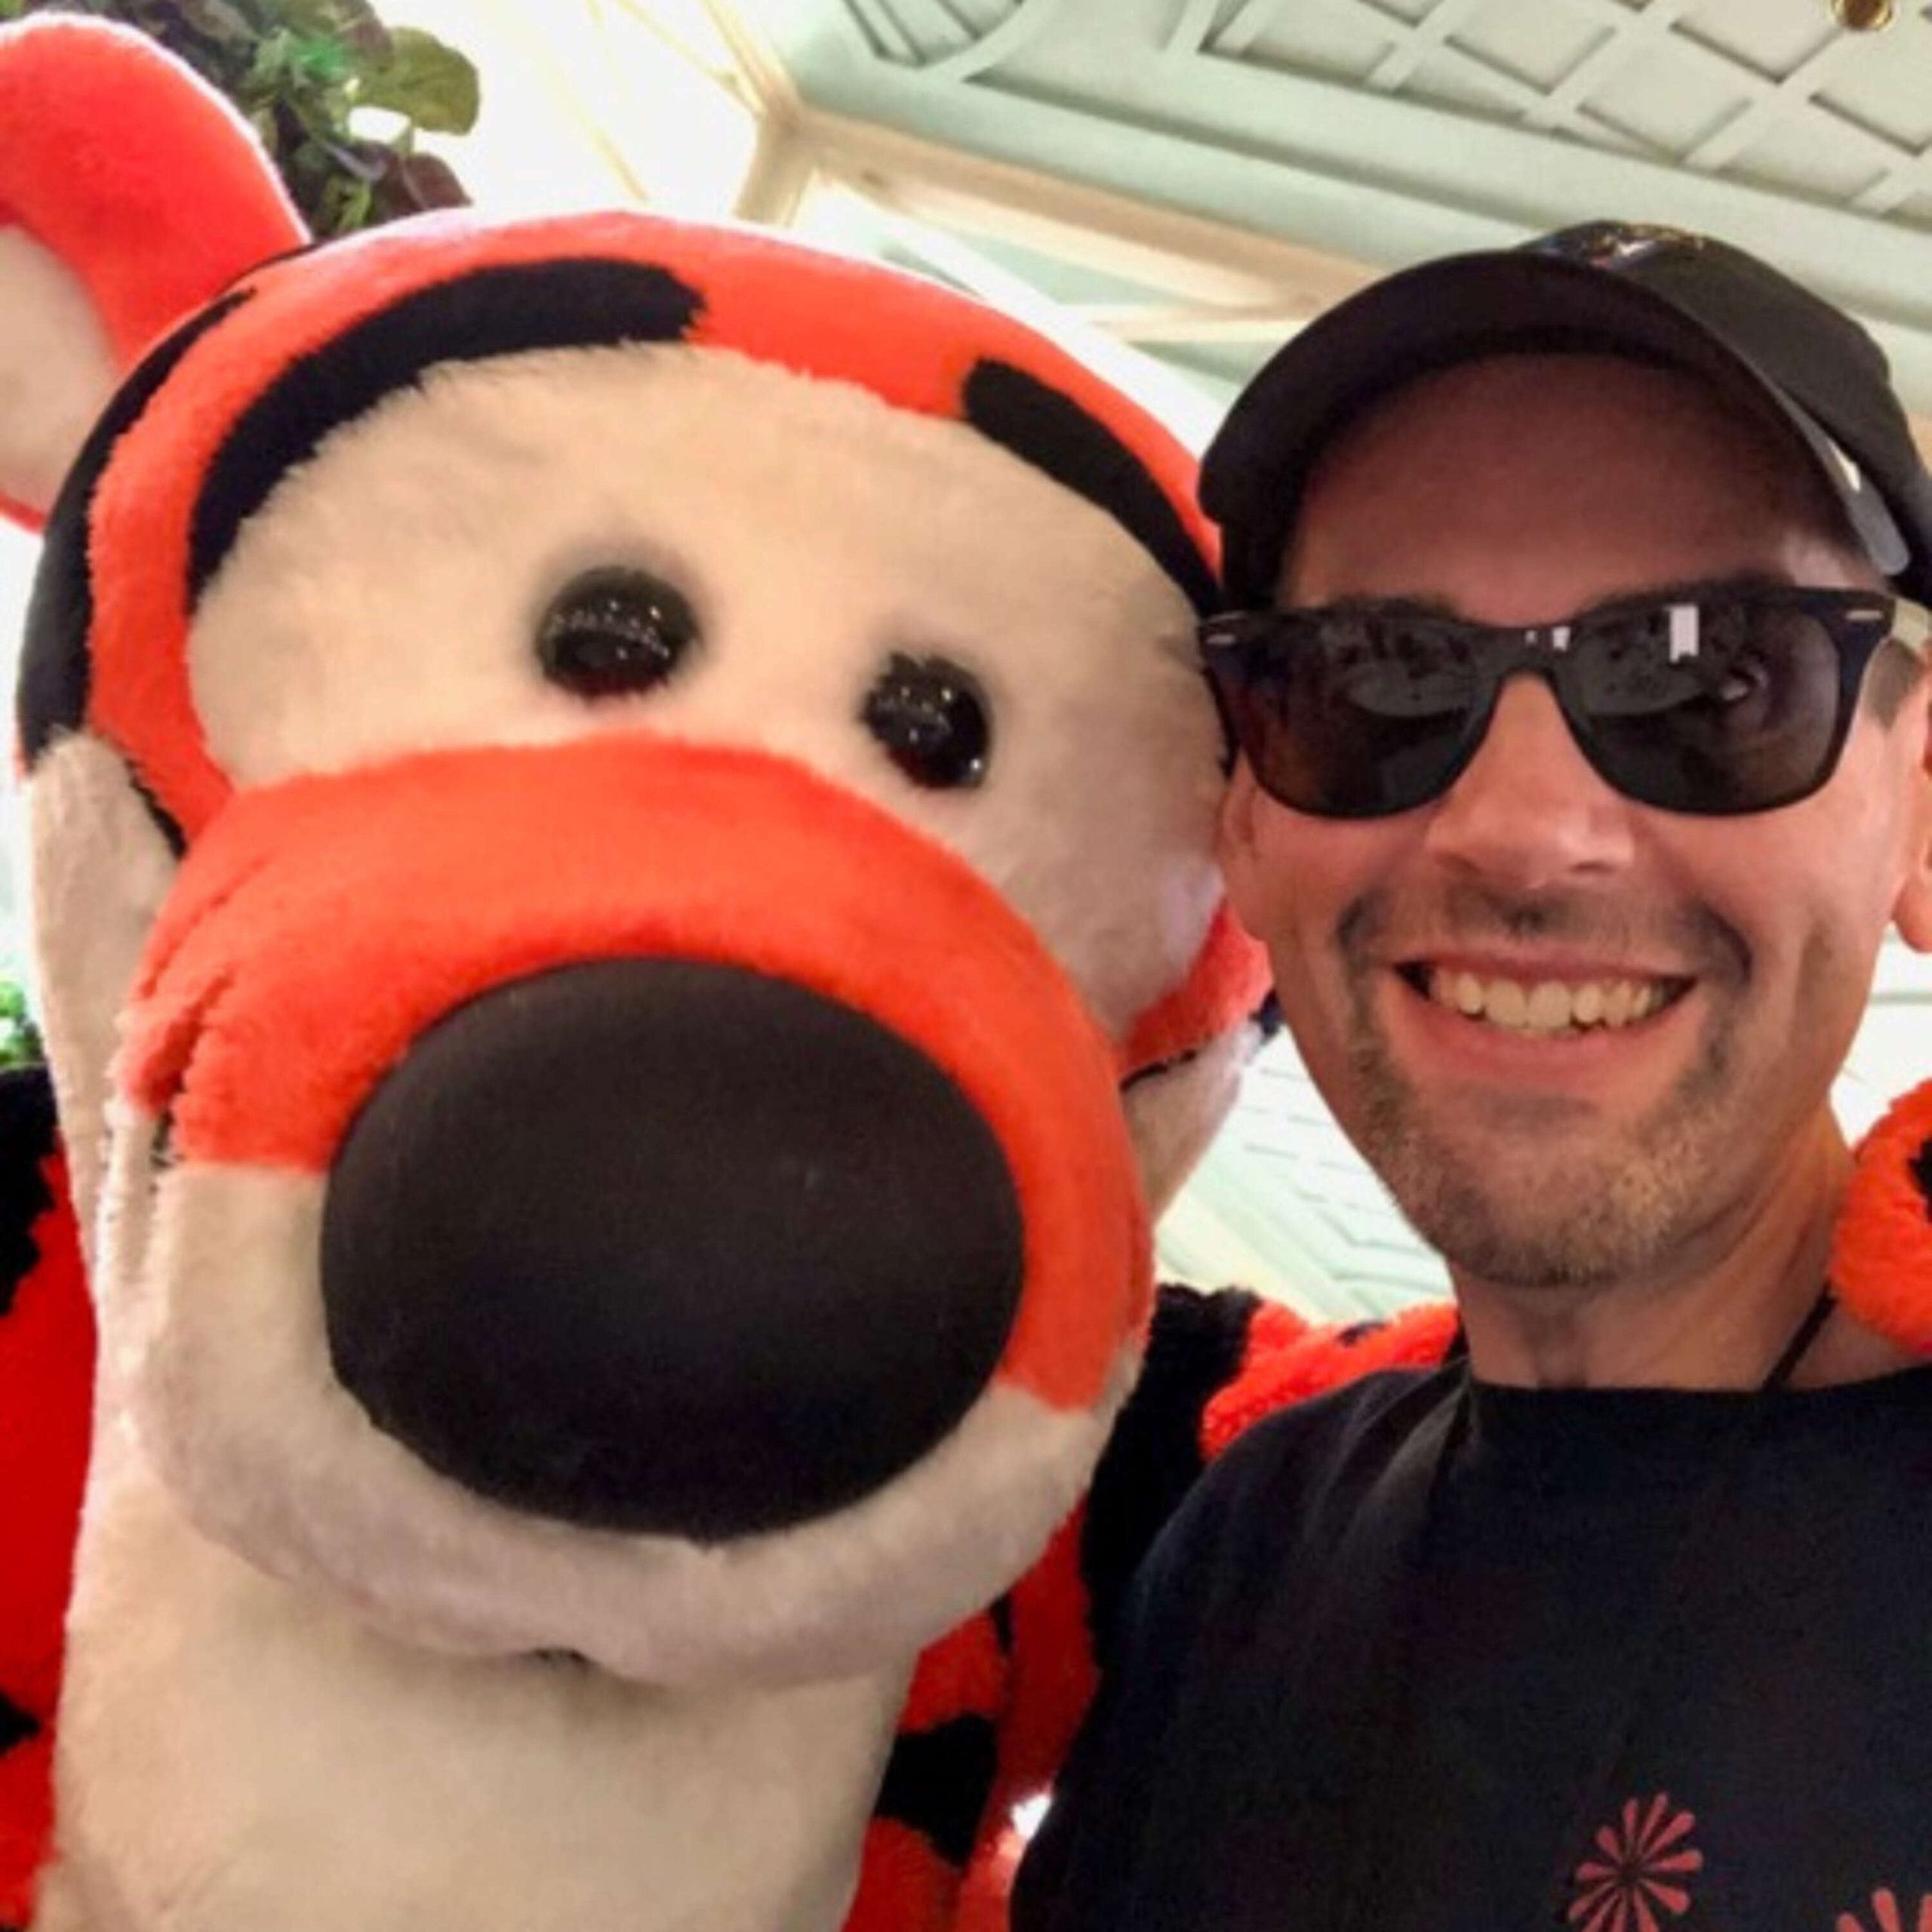 A man in sunglasses is posing with a tiger mascot.